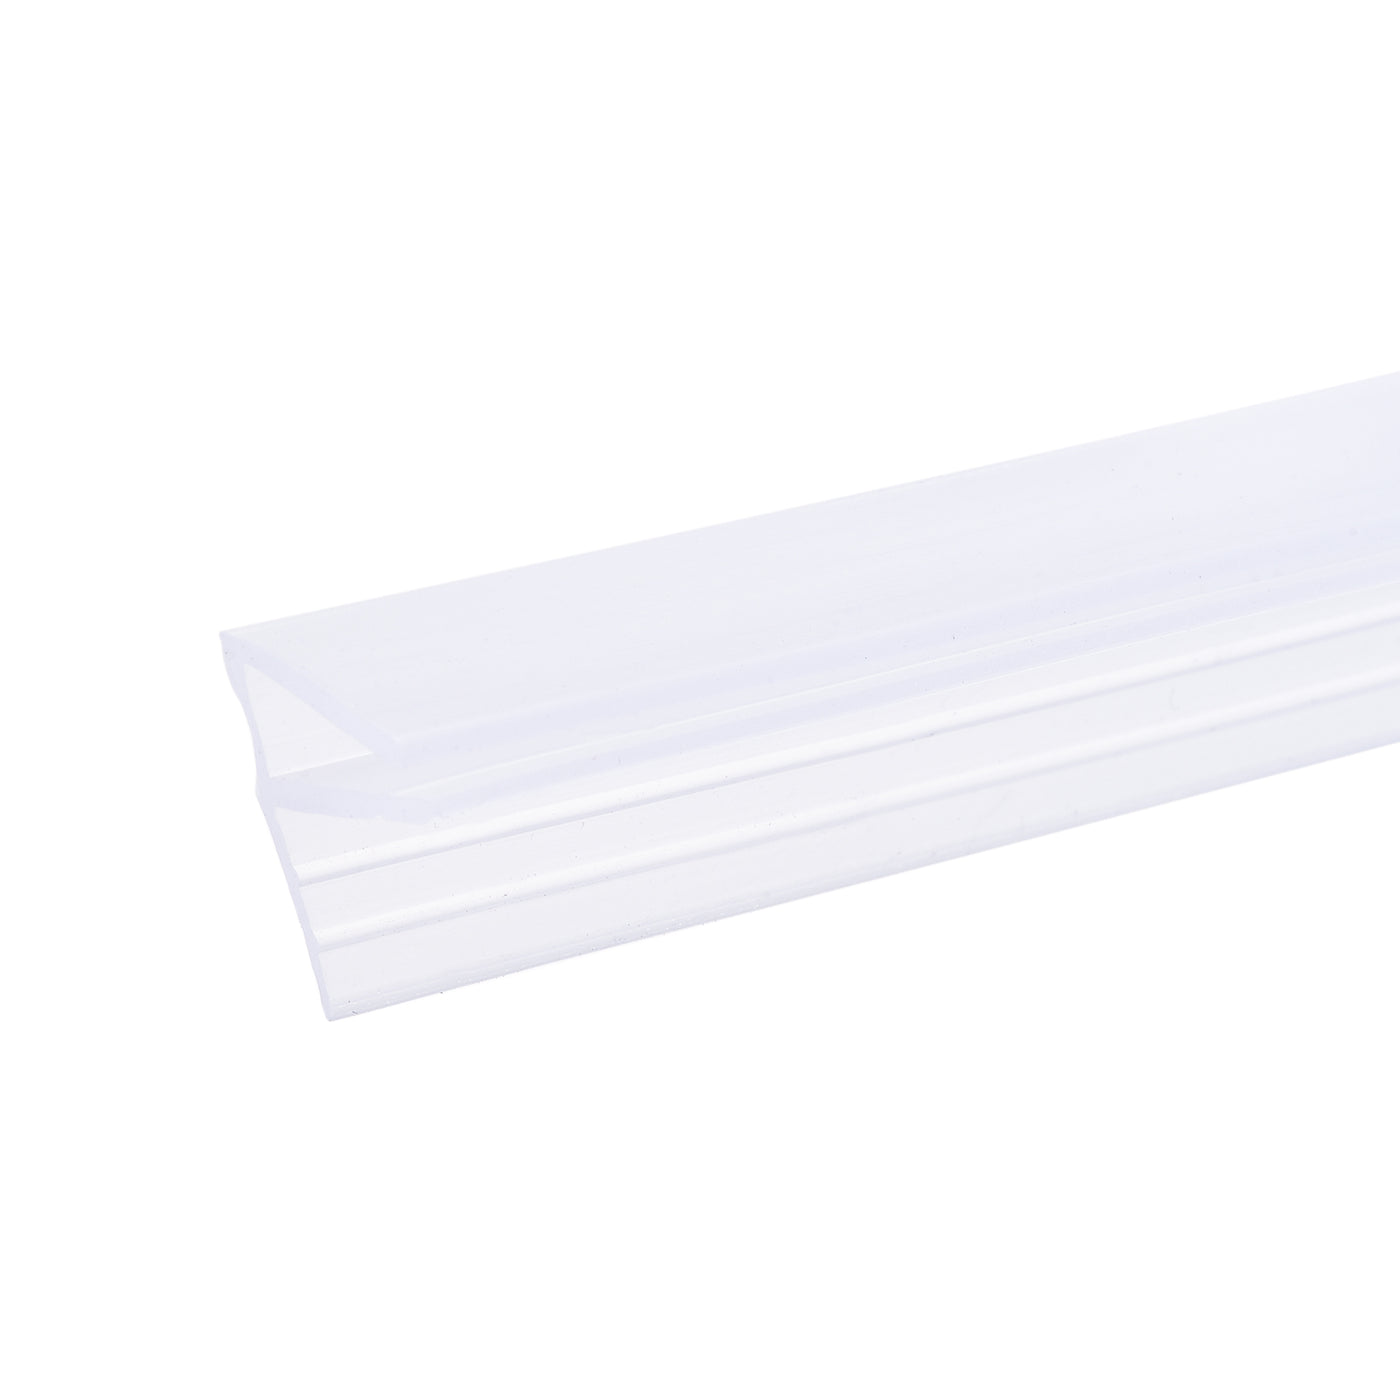 Uxcell Uxcell Frameless Glass Shower Door Sweep 177.17" for 1/4"(6mm) Glass F-Type Seal Strip